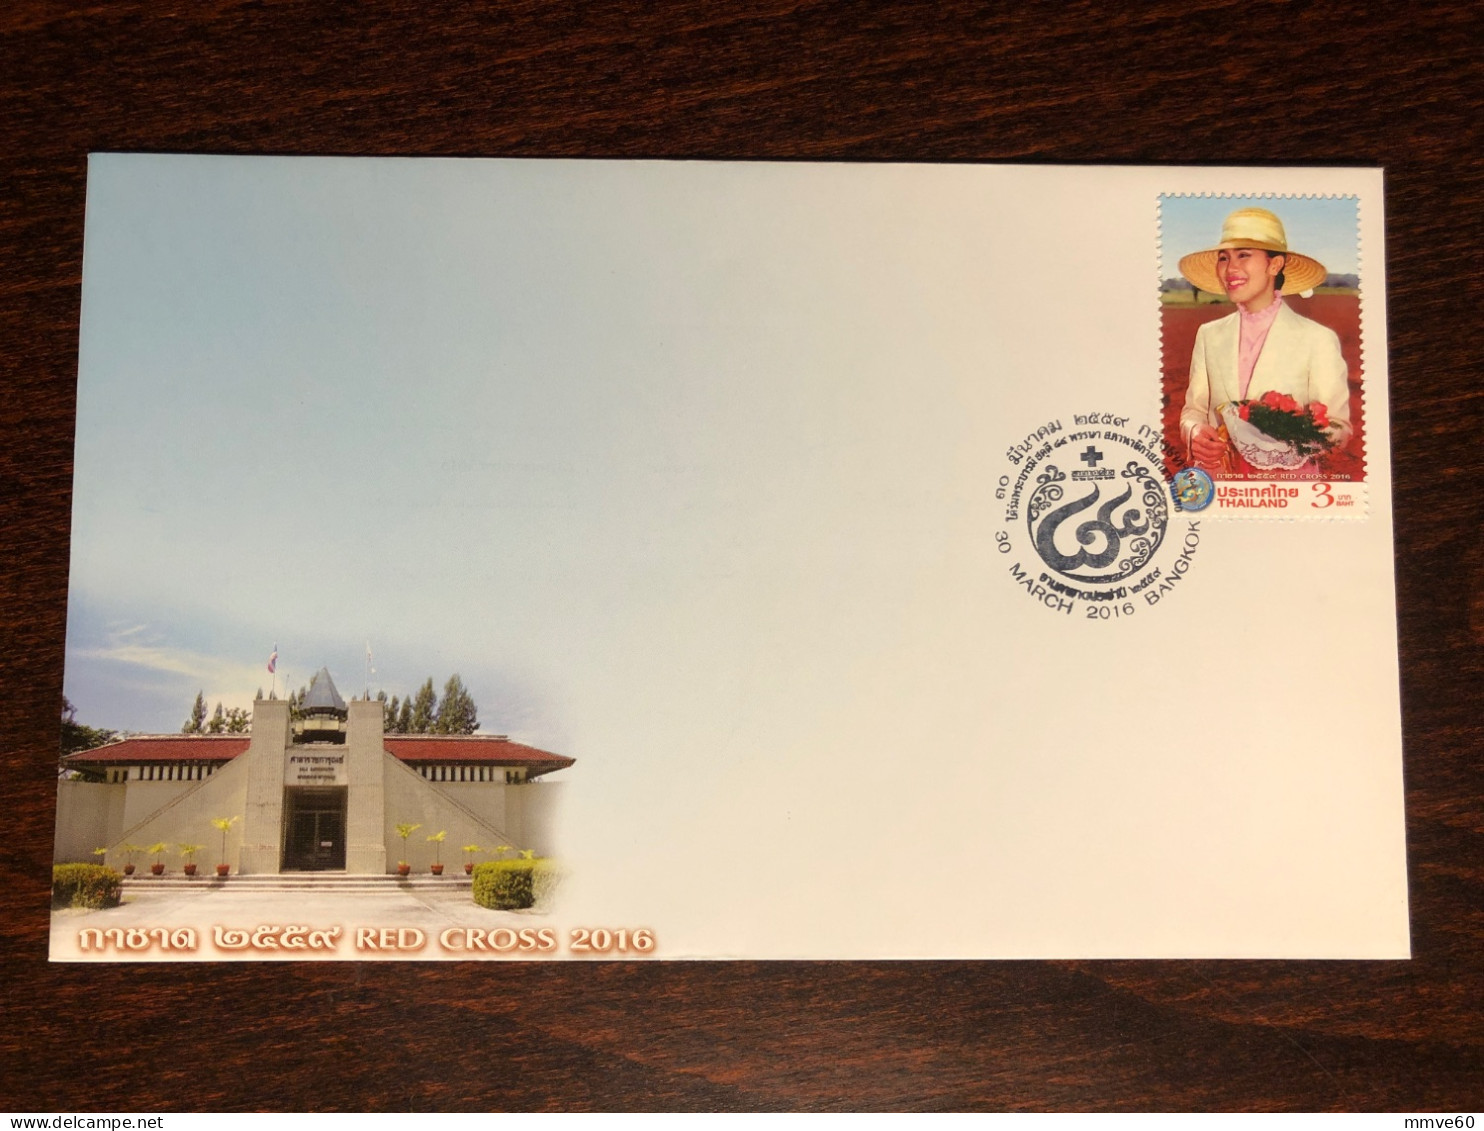 THAILAND FDC COVER 2016 YEAR RED CROSS HEALTH MEDICINE STAMPS - Thaïlande